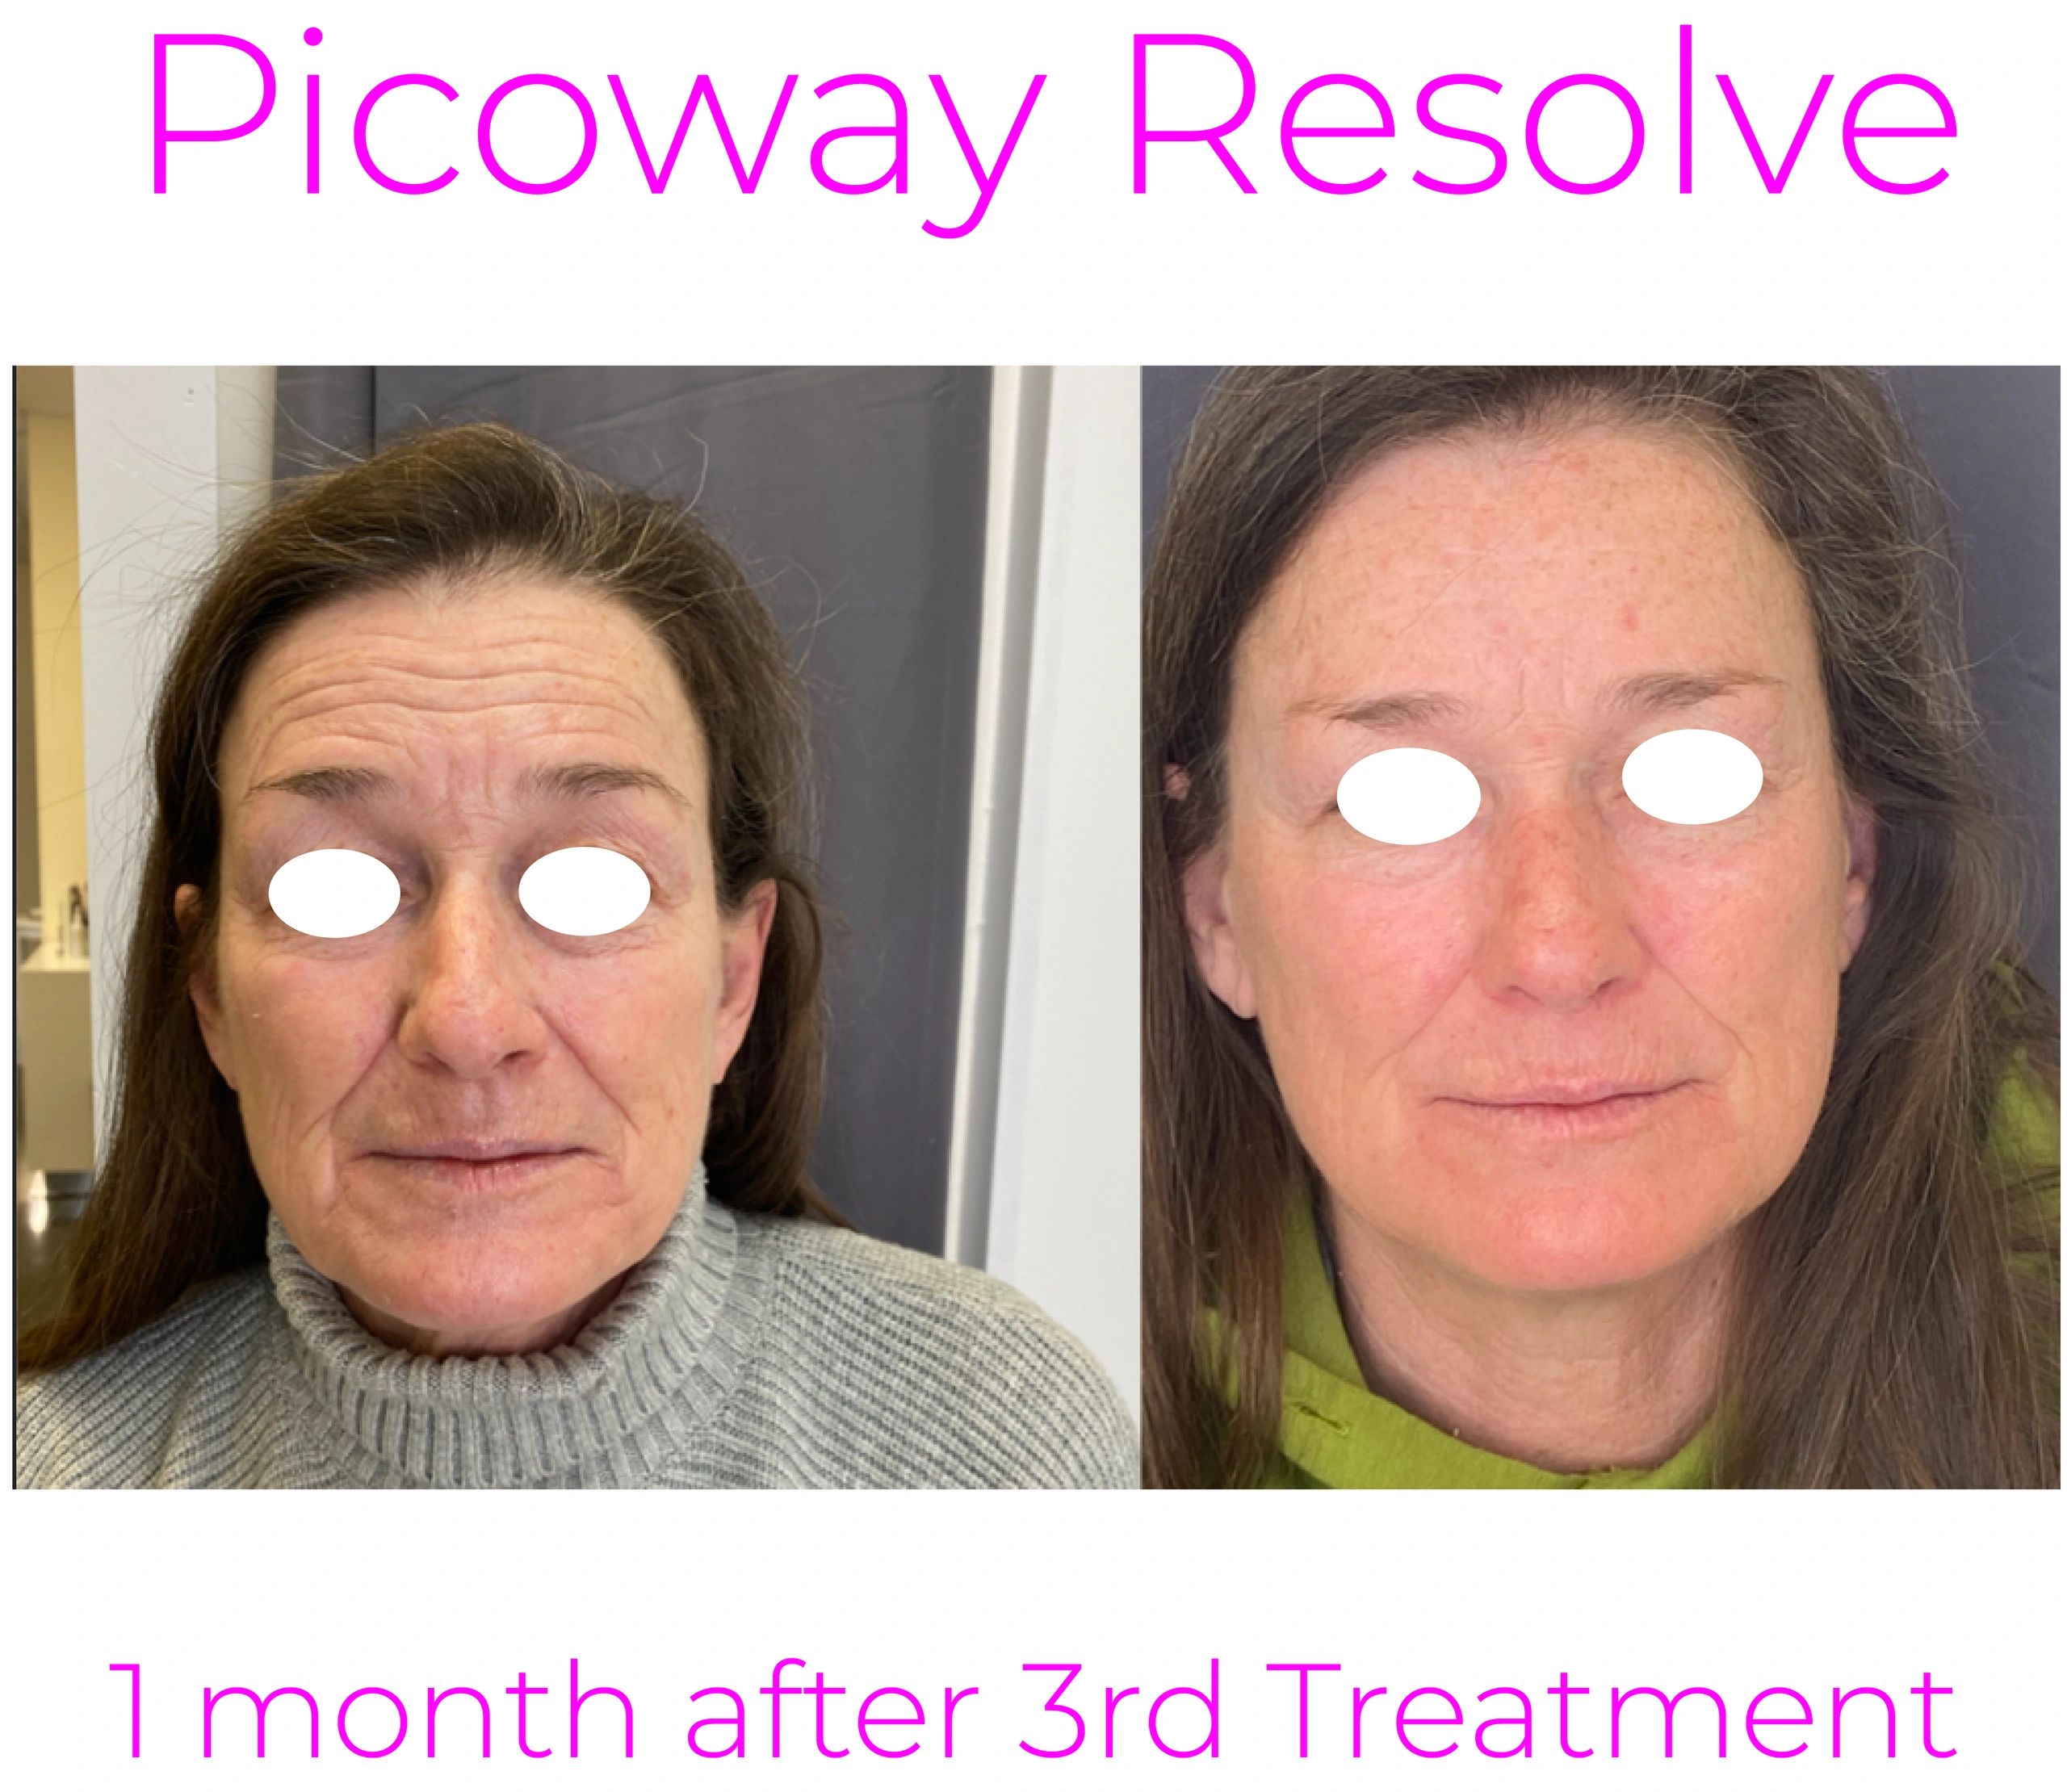 This 58 year old  client had monthly Picoway Resolve treatments, this is 1 month after her 3rd treat